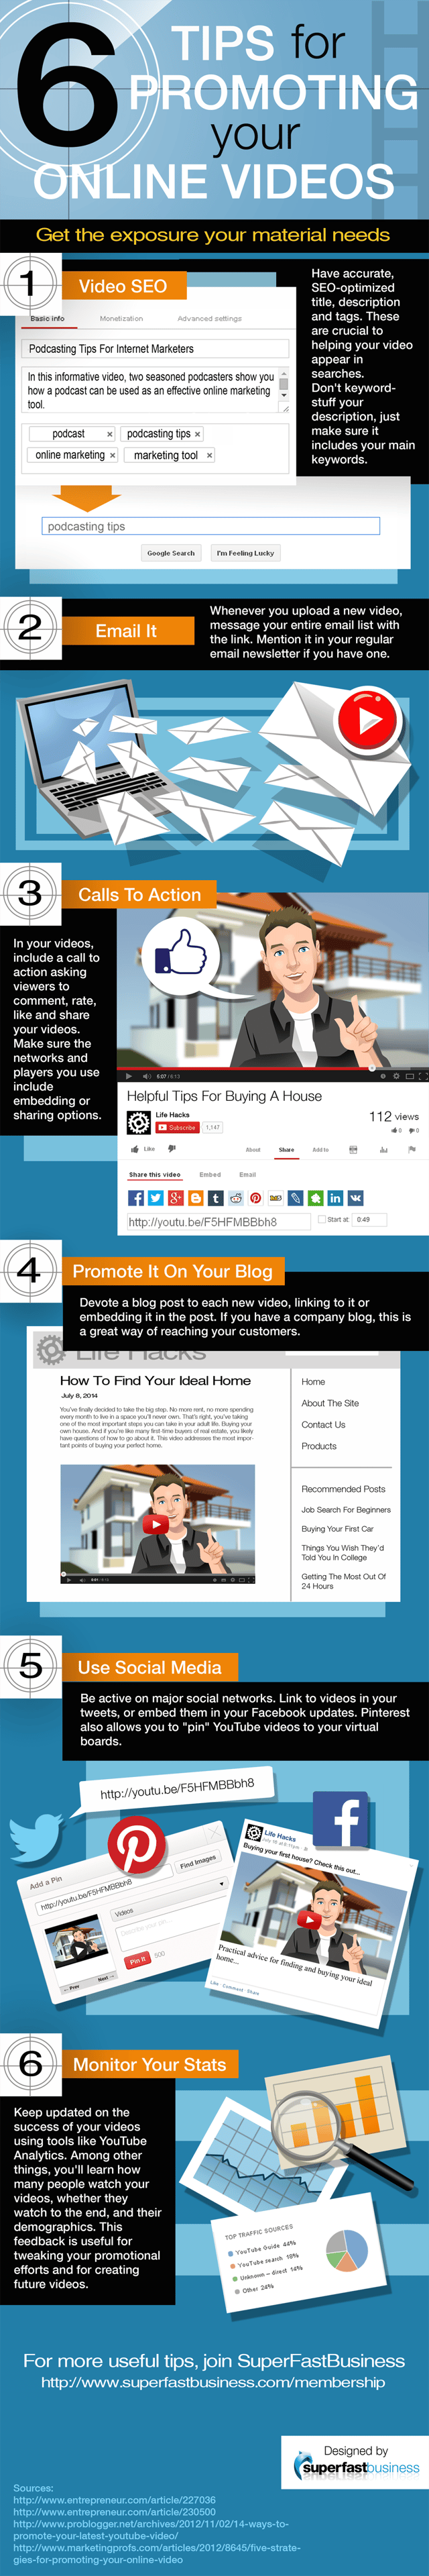 tips on promoting online content such as videos and webinars